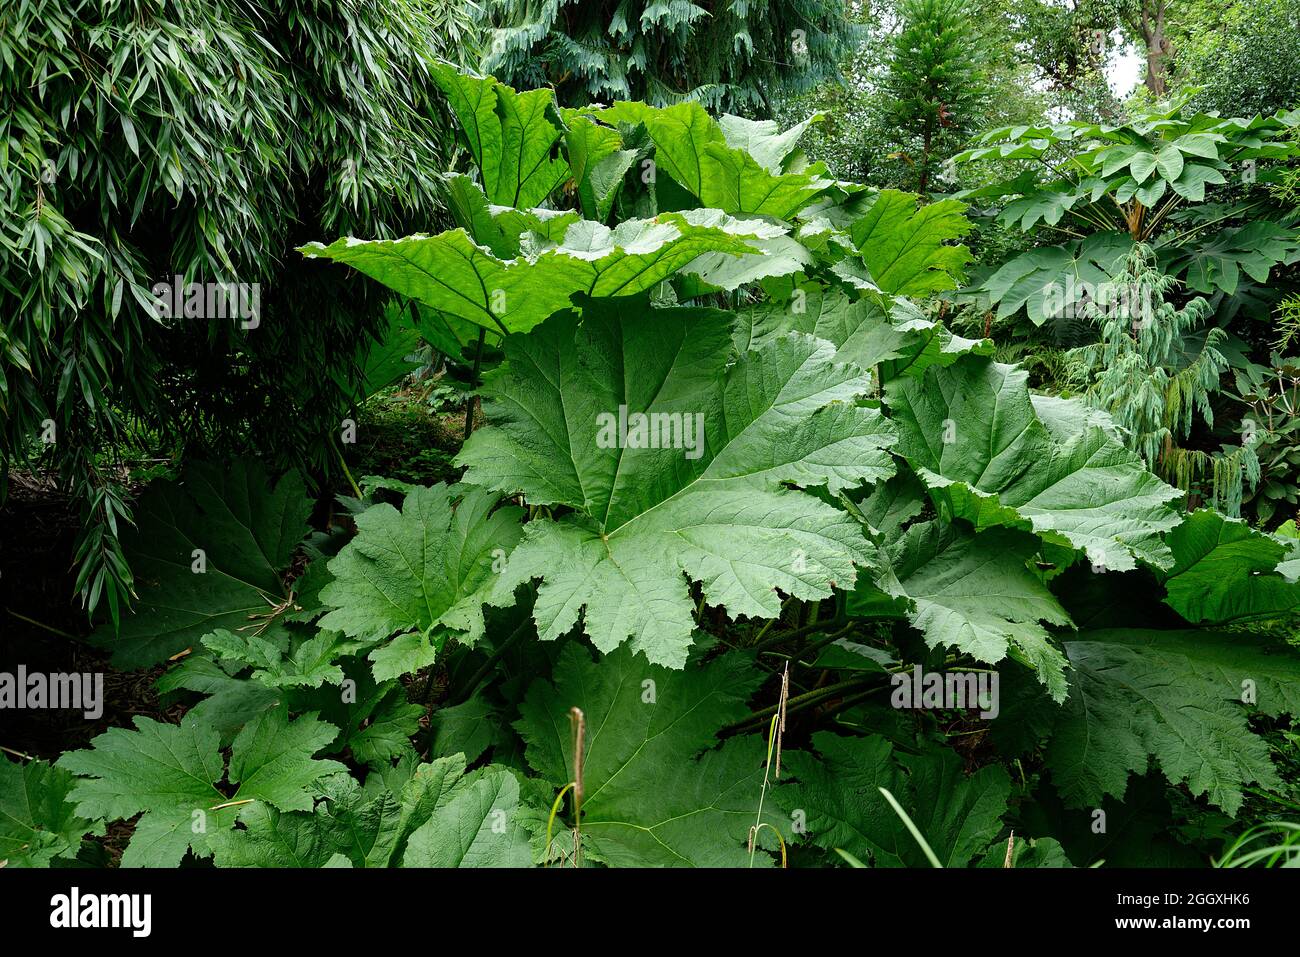 Gunnera Manicata plants. Also known as giant spiky rhubarb plant. Prehistoric tropical plant. Architectural plant that likes damp places. Stock Photo